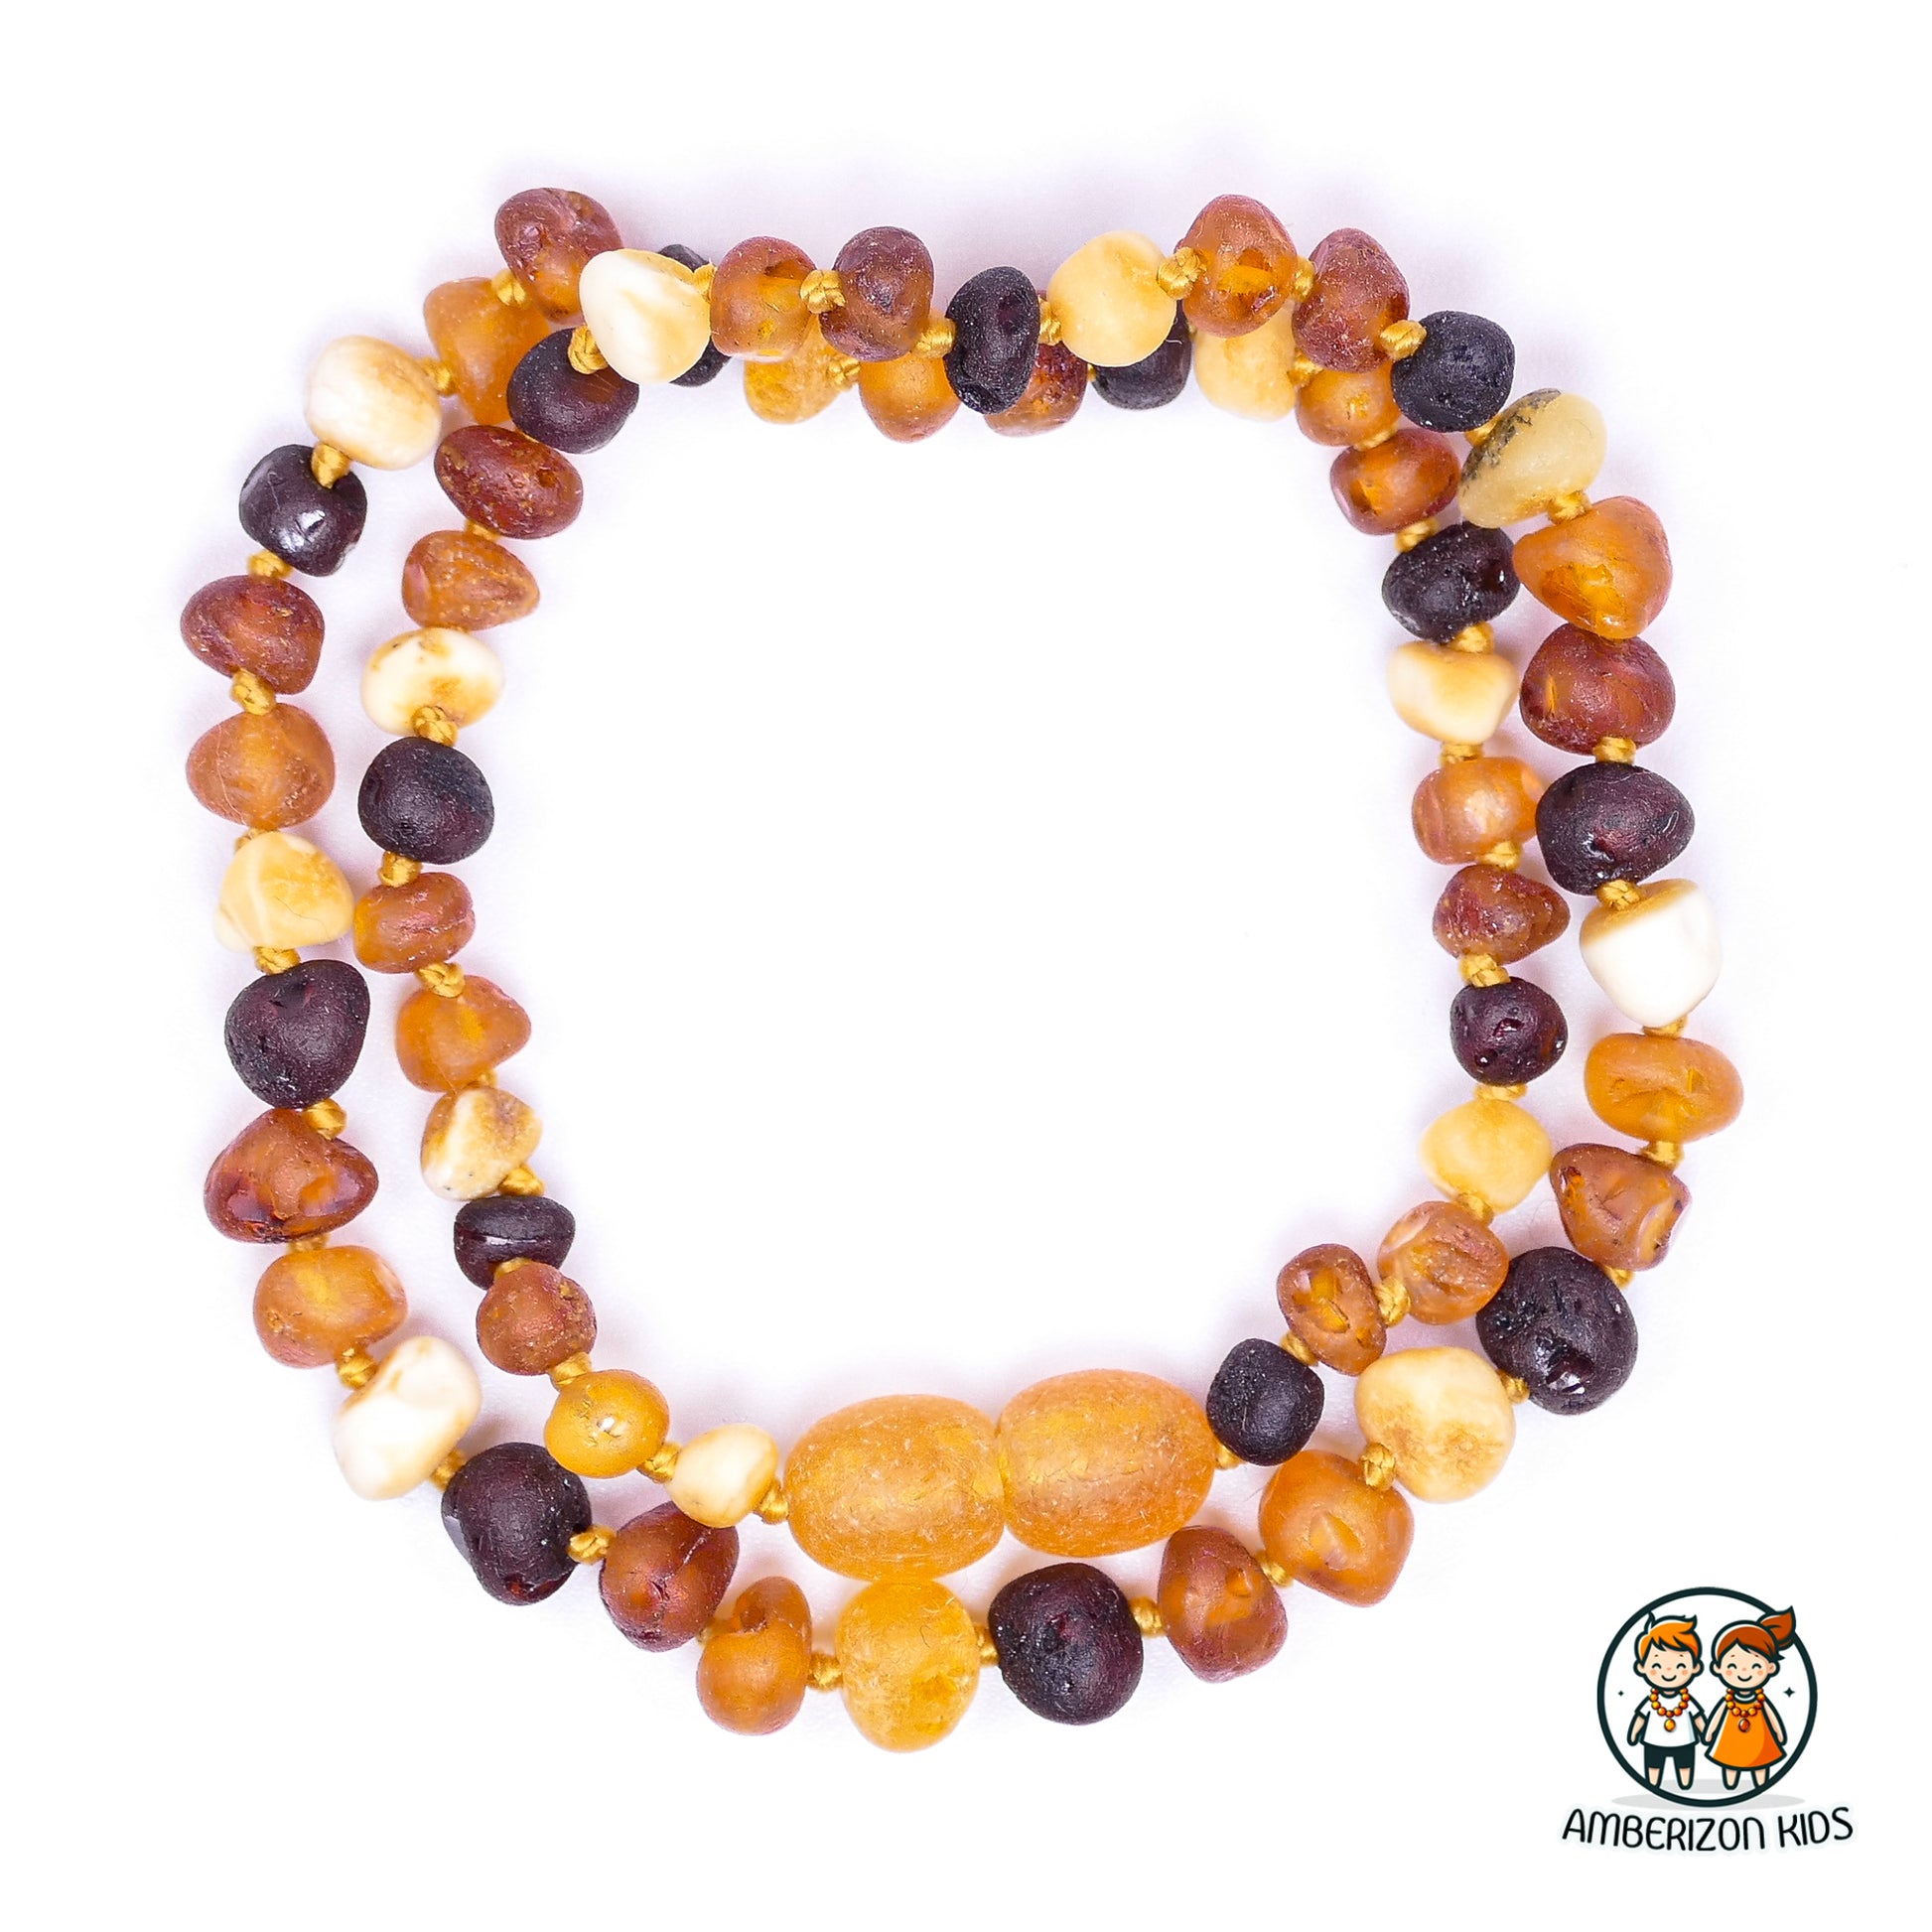 Baltic amber baby necklace - Small unpolished raw amber beads